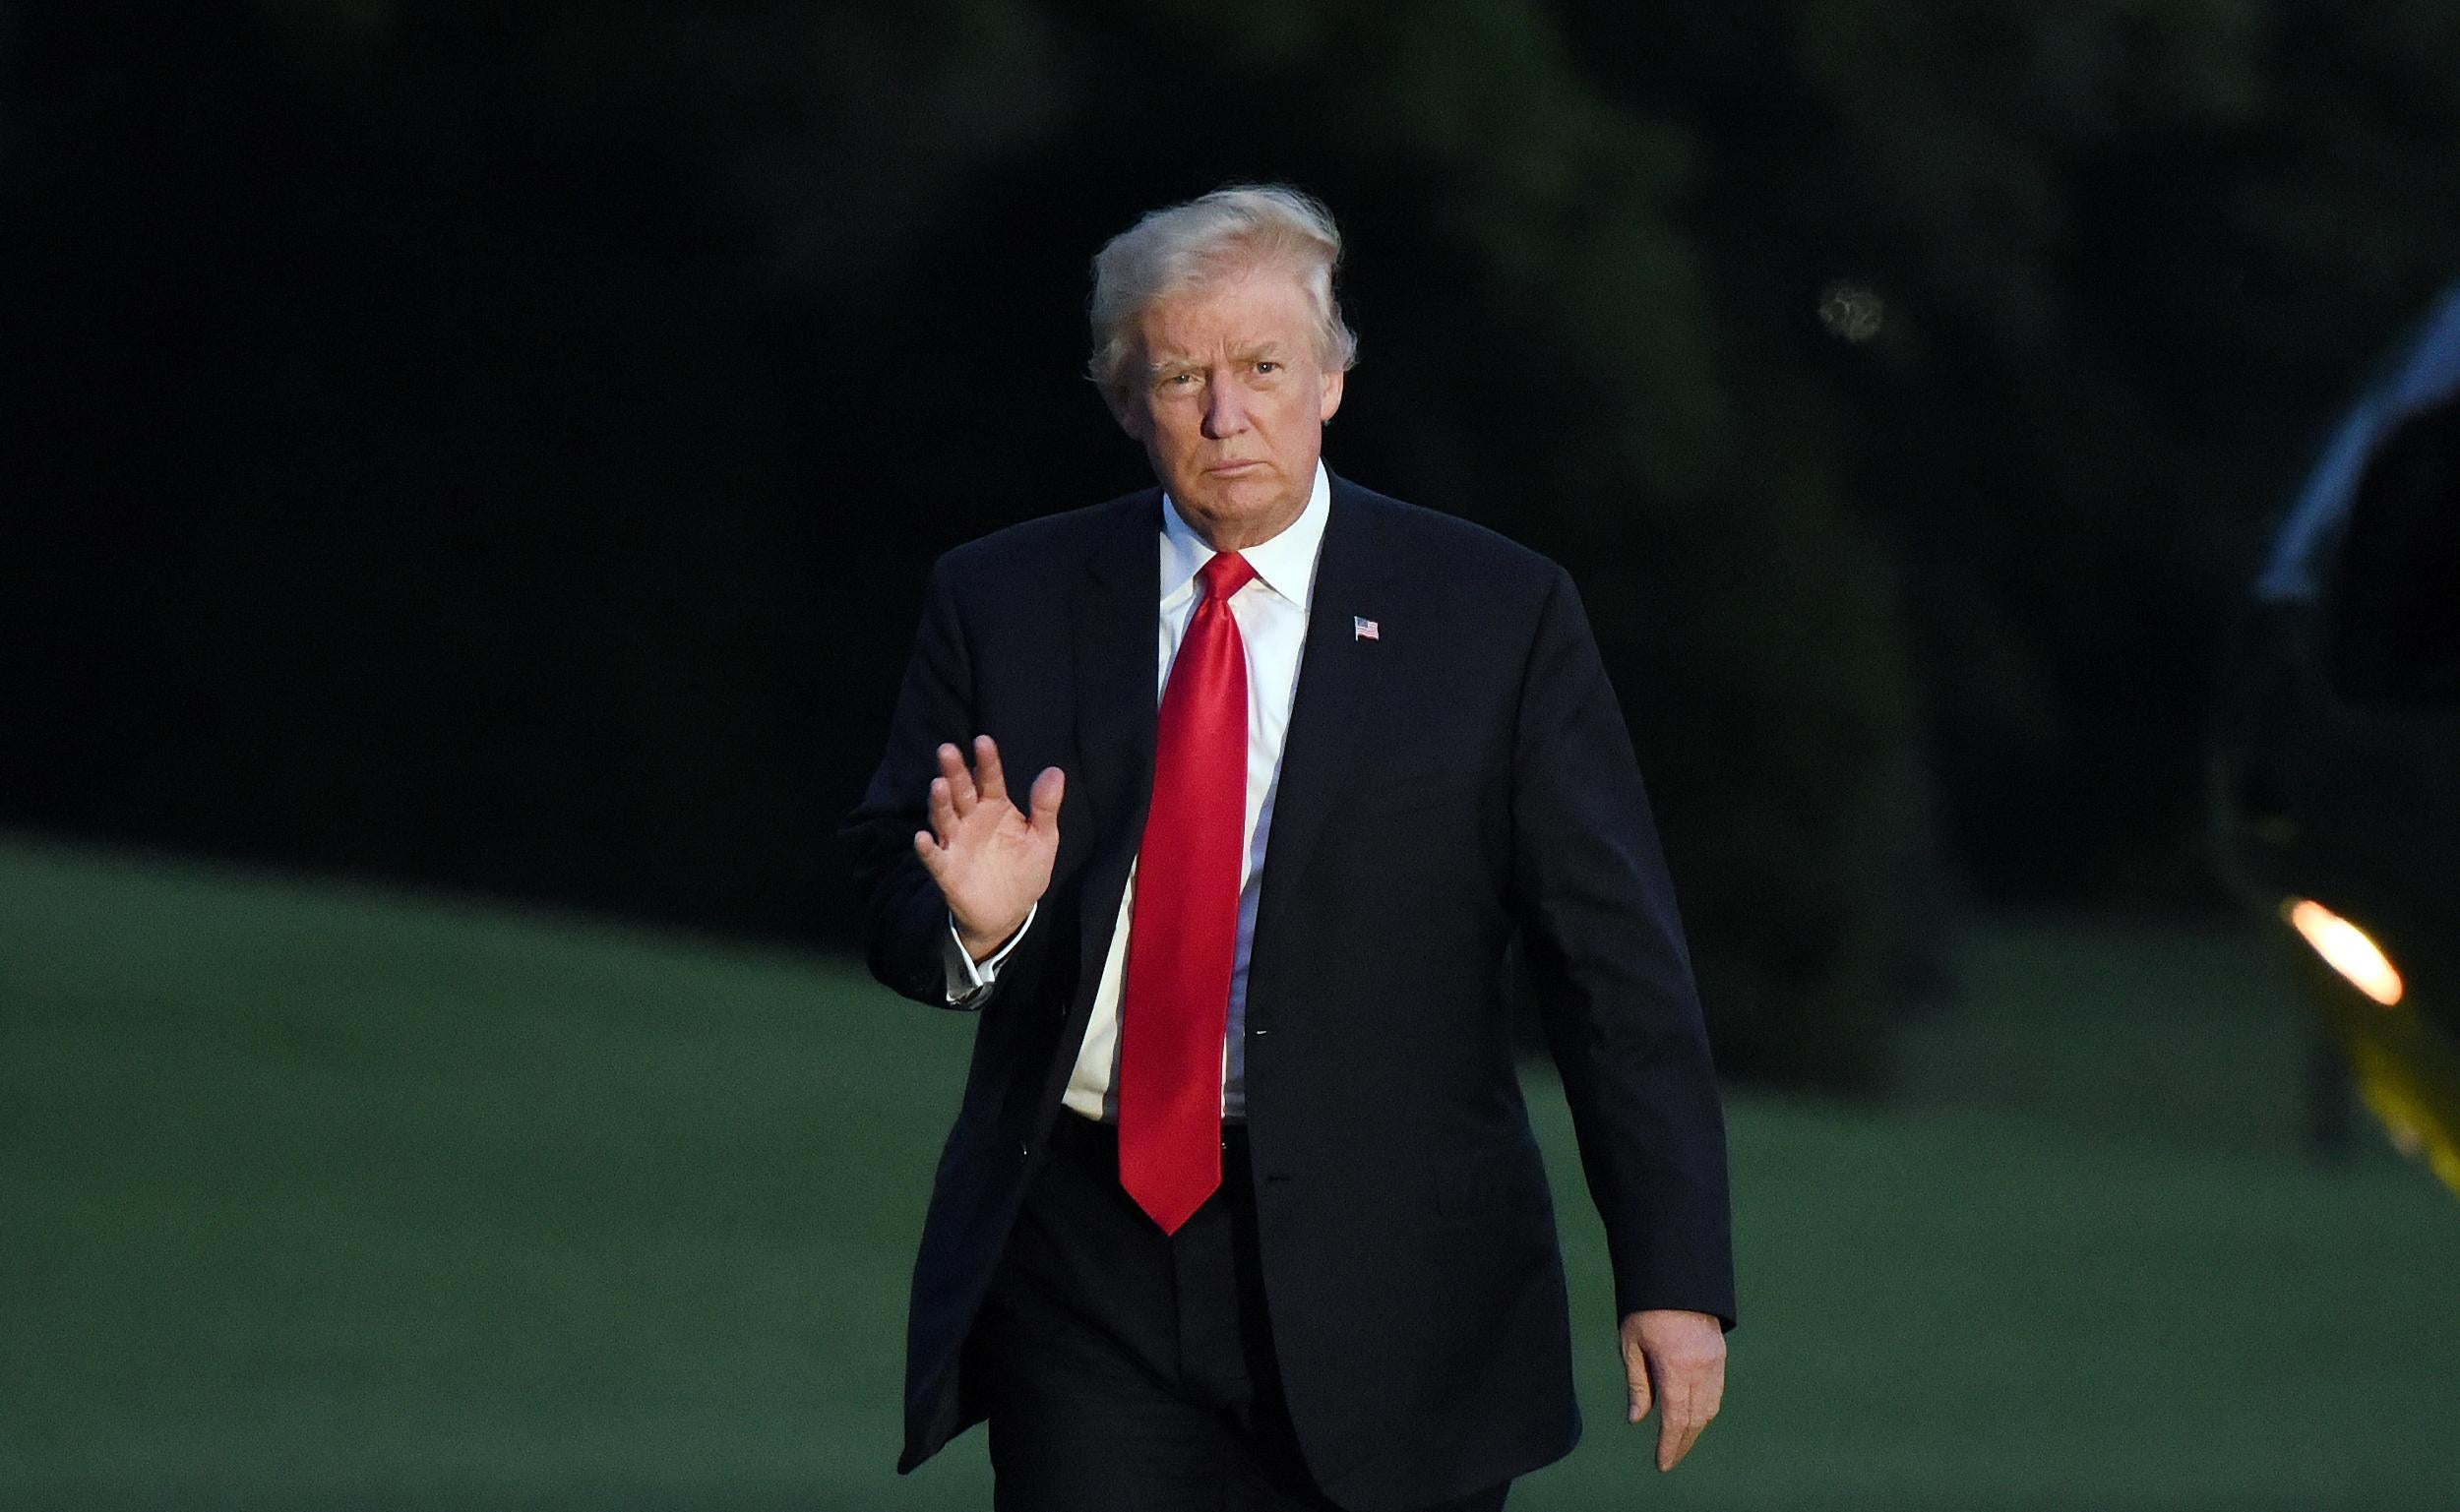 President Donald Trump waves as he returns to the White House